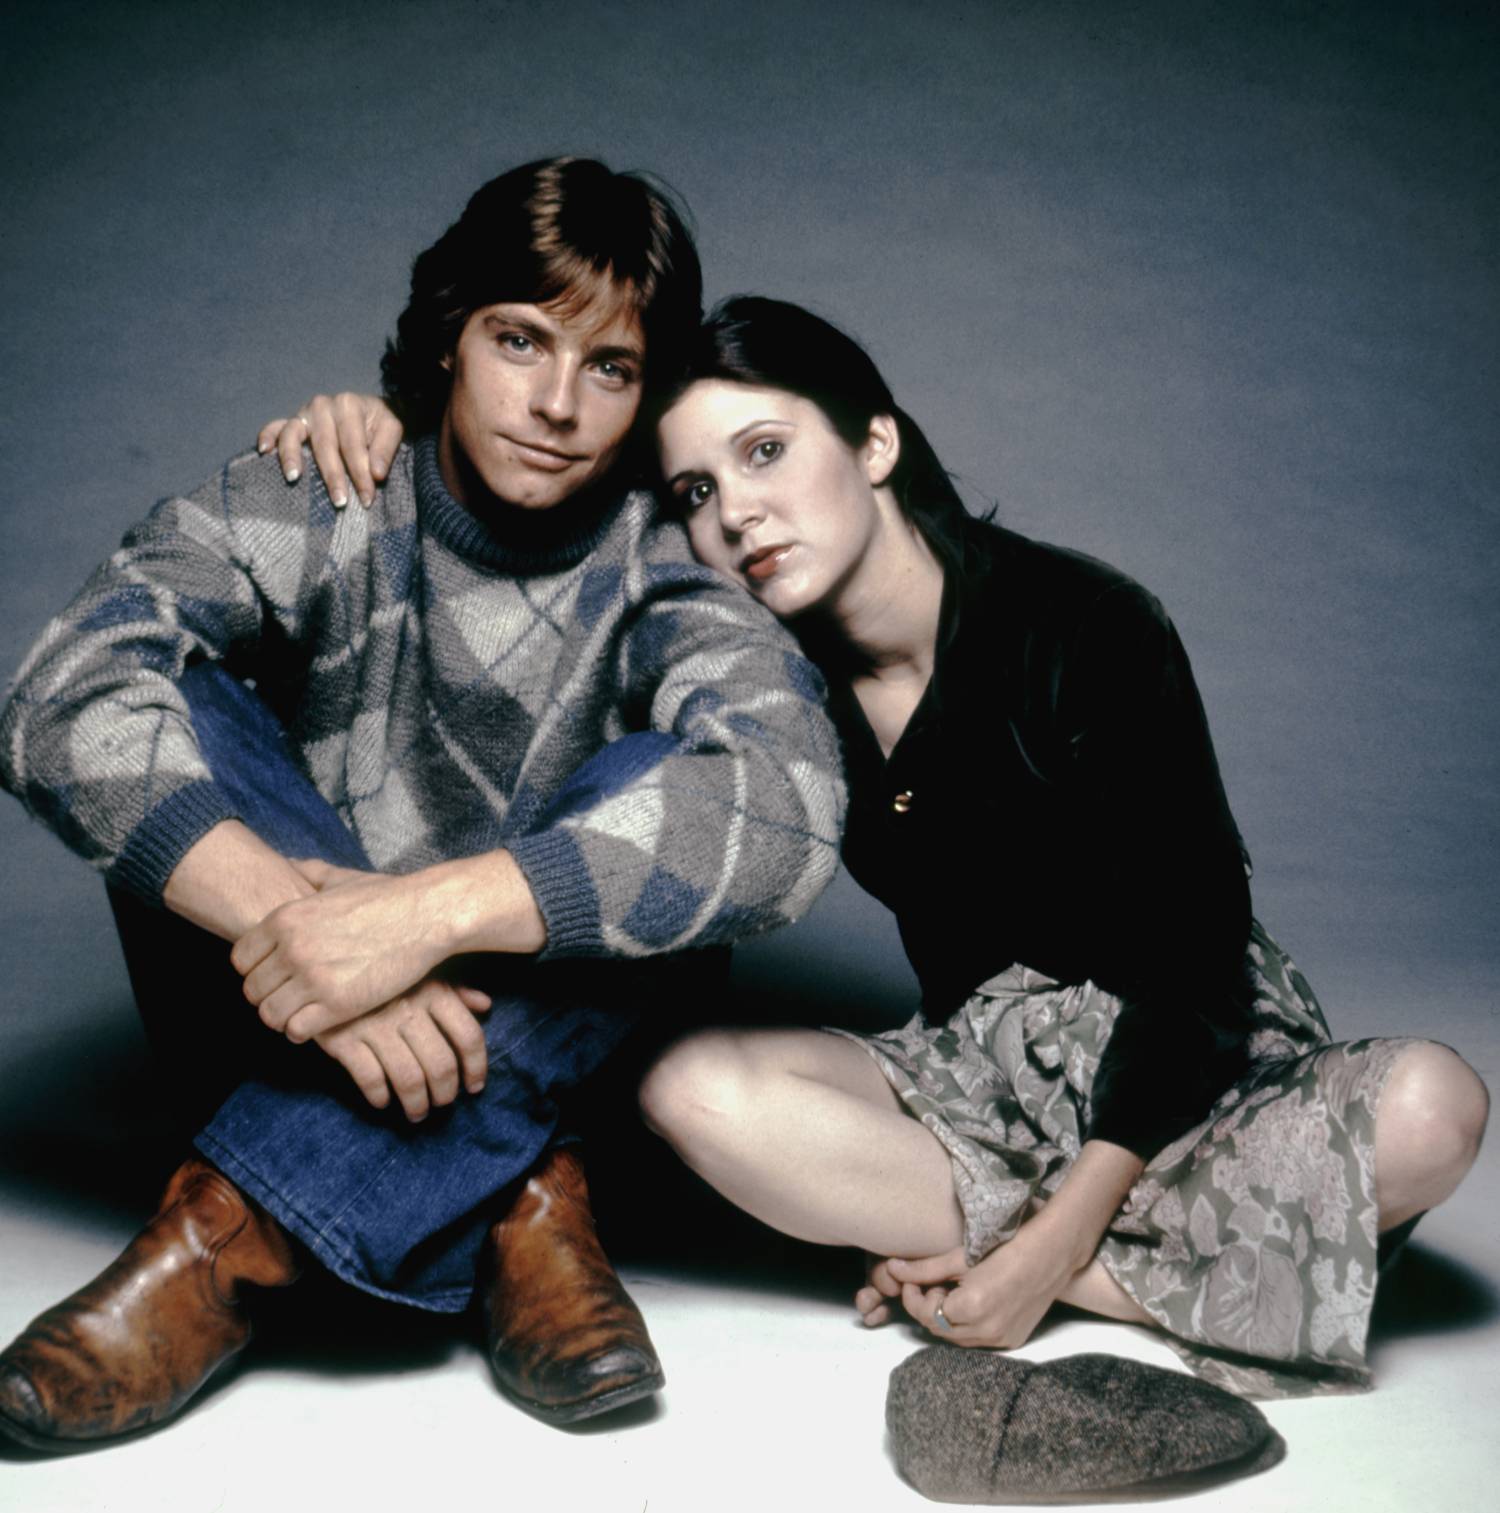 American actors Mark Hamill and Carrie Fisher on the set of Star Wars, written, directed and produced by George Lucas.